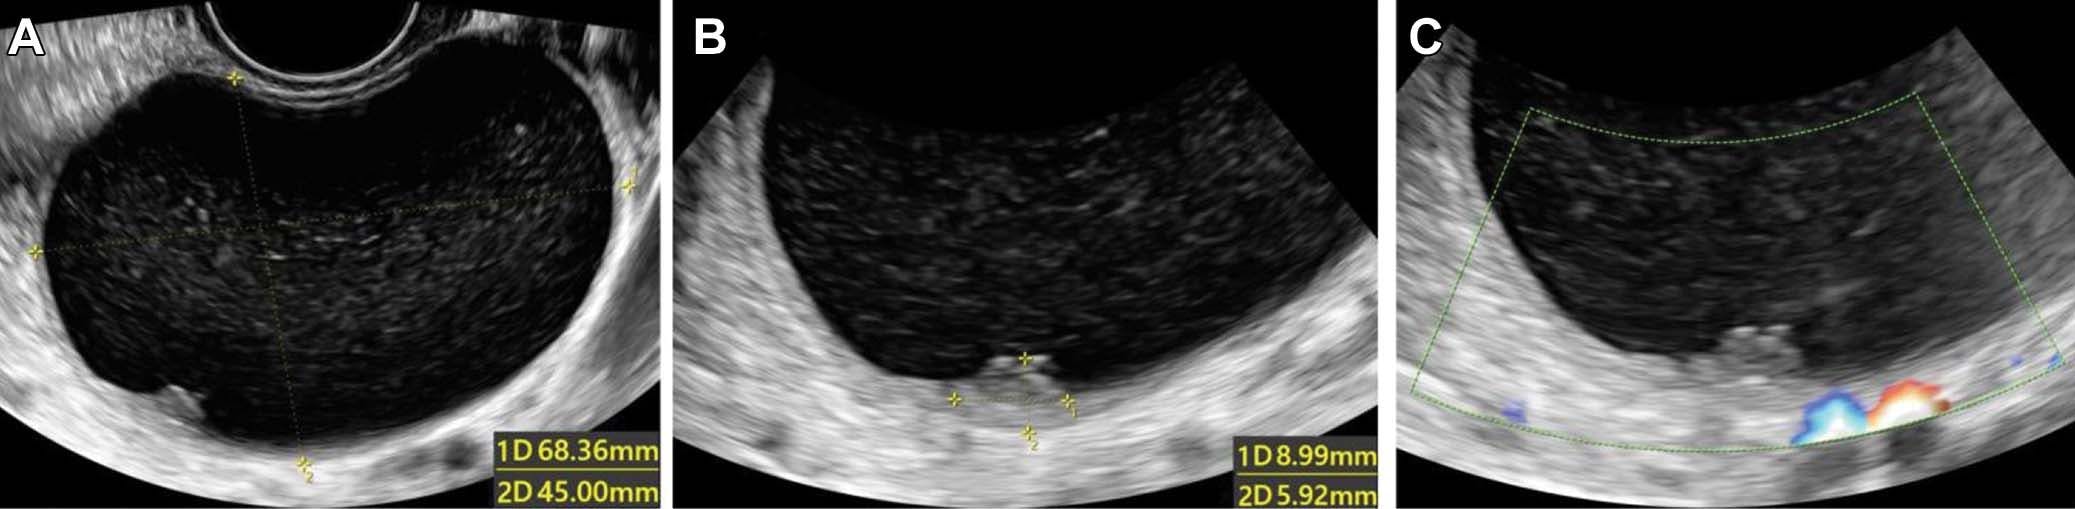 Can Deep Learning Ultrasound Assessment be a Viable Option for Diagnosing Ovarian Cancer?